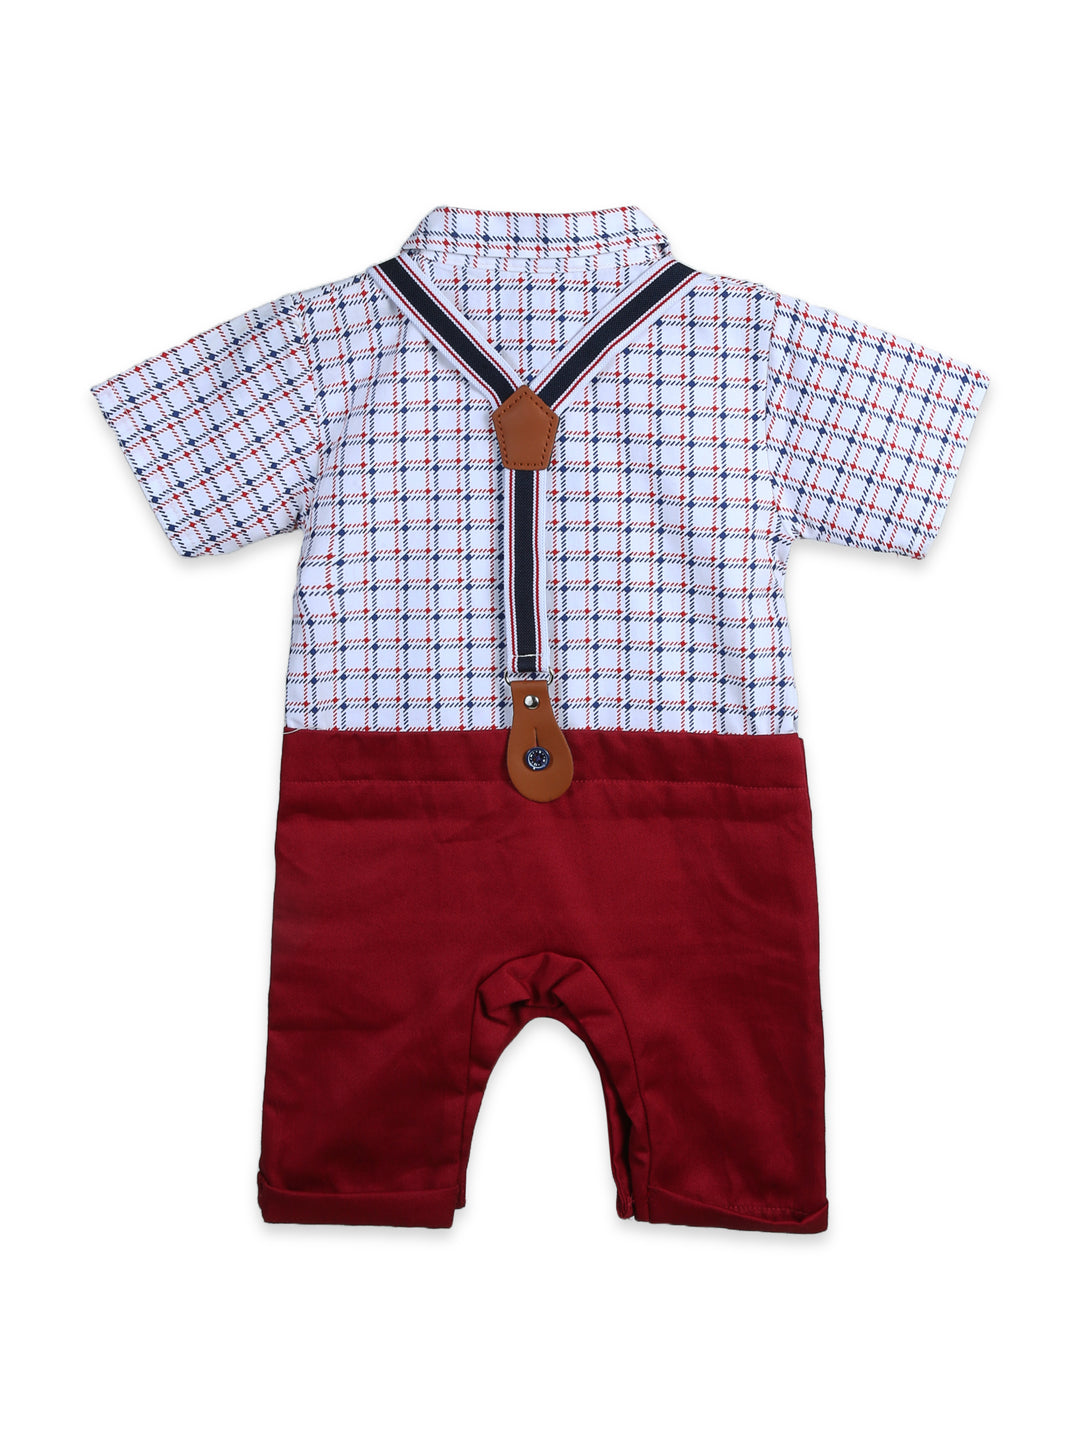 Bingobhoom Boys H/S Romper With Bow & Gallace #469 (W-22)